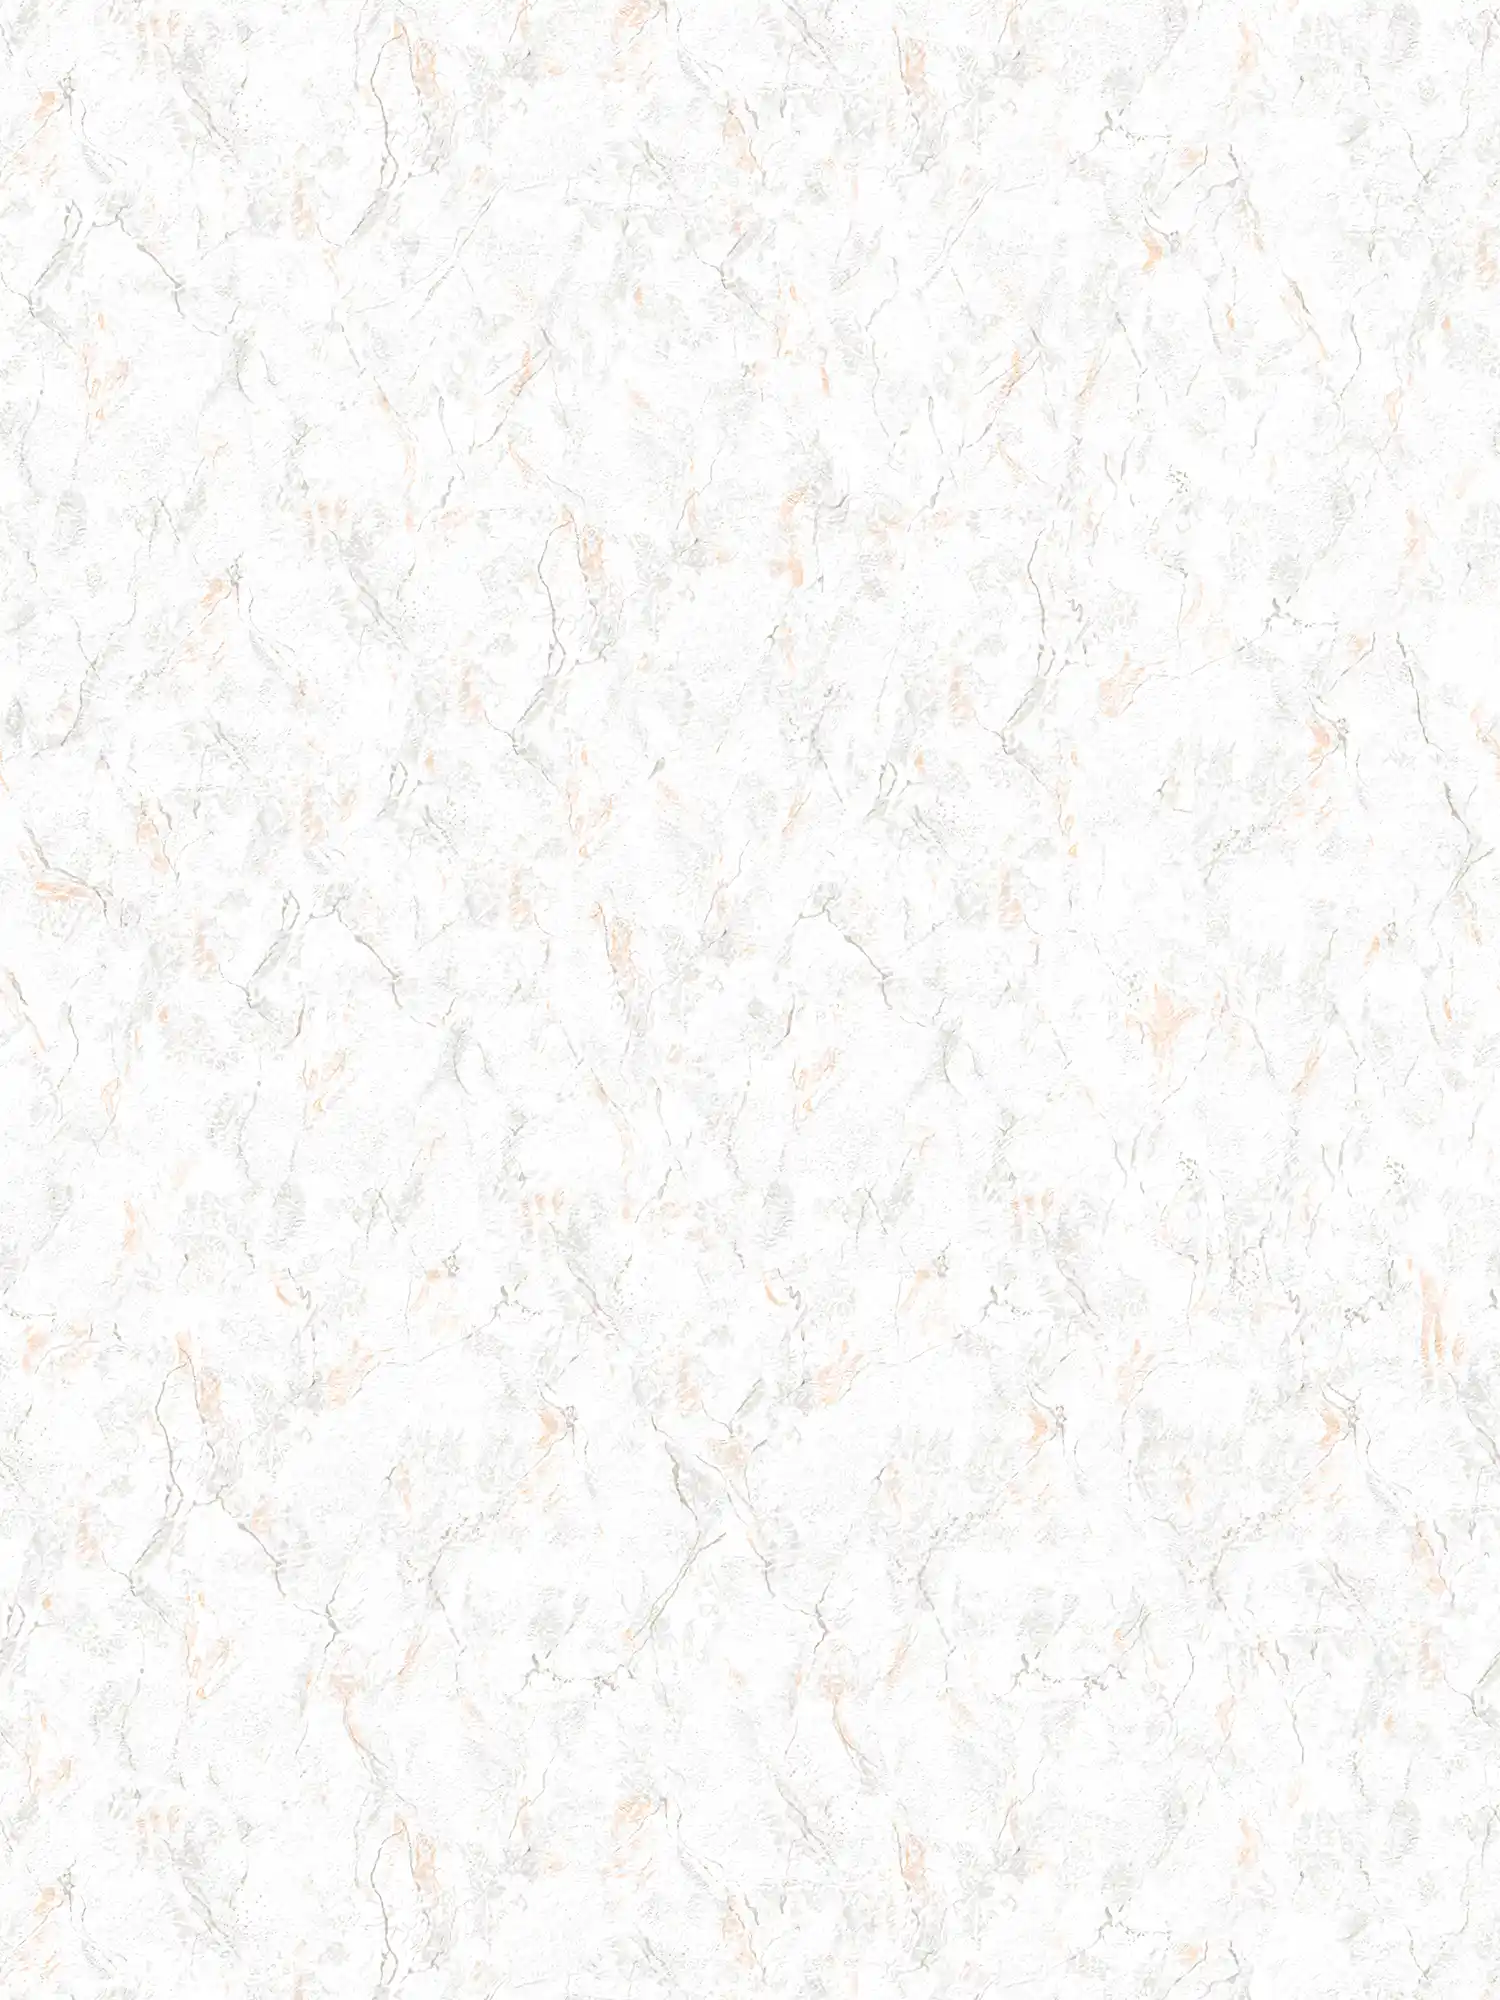 Marbled wallpaper with natural stone look - grey, white
